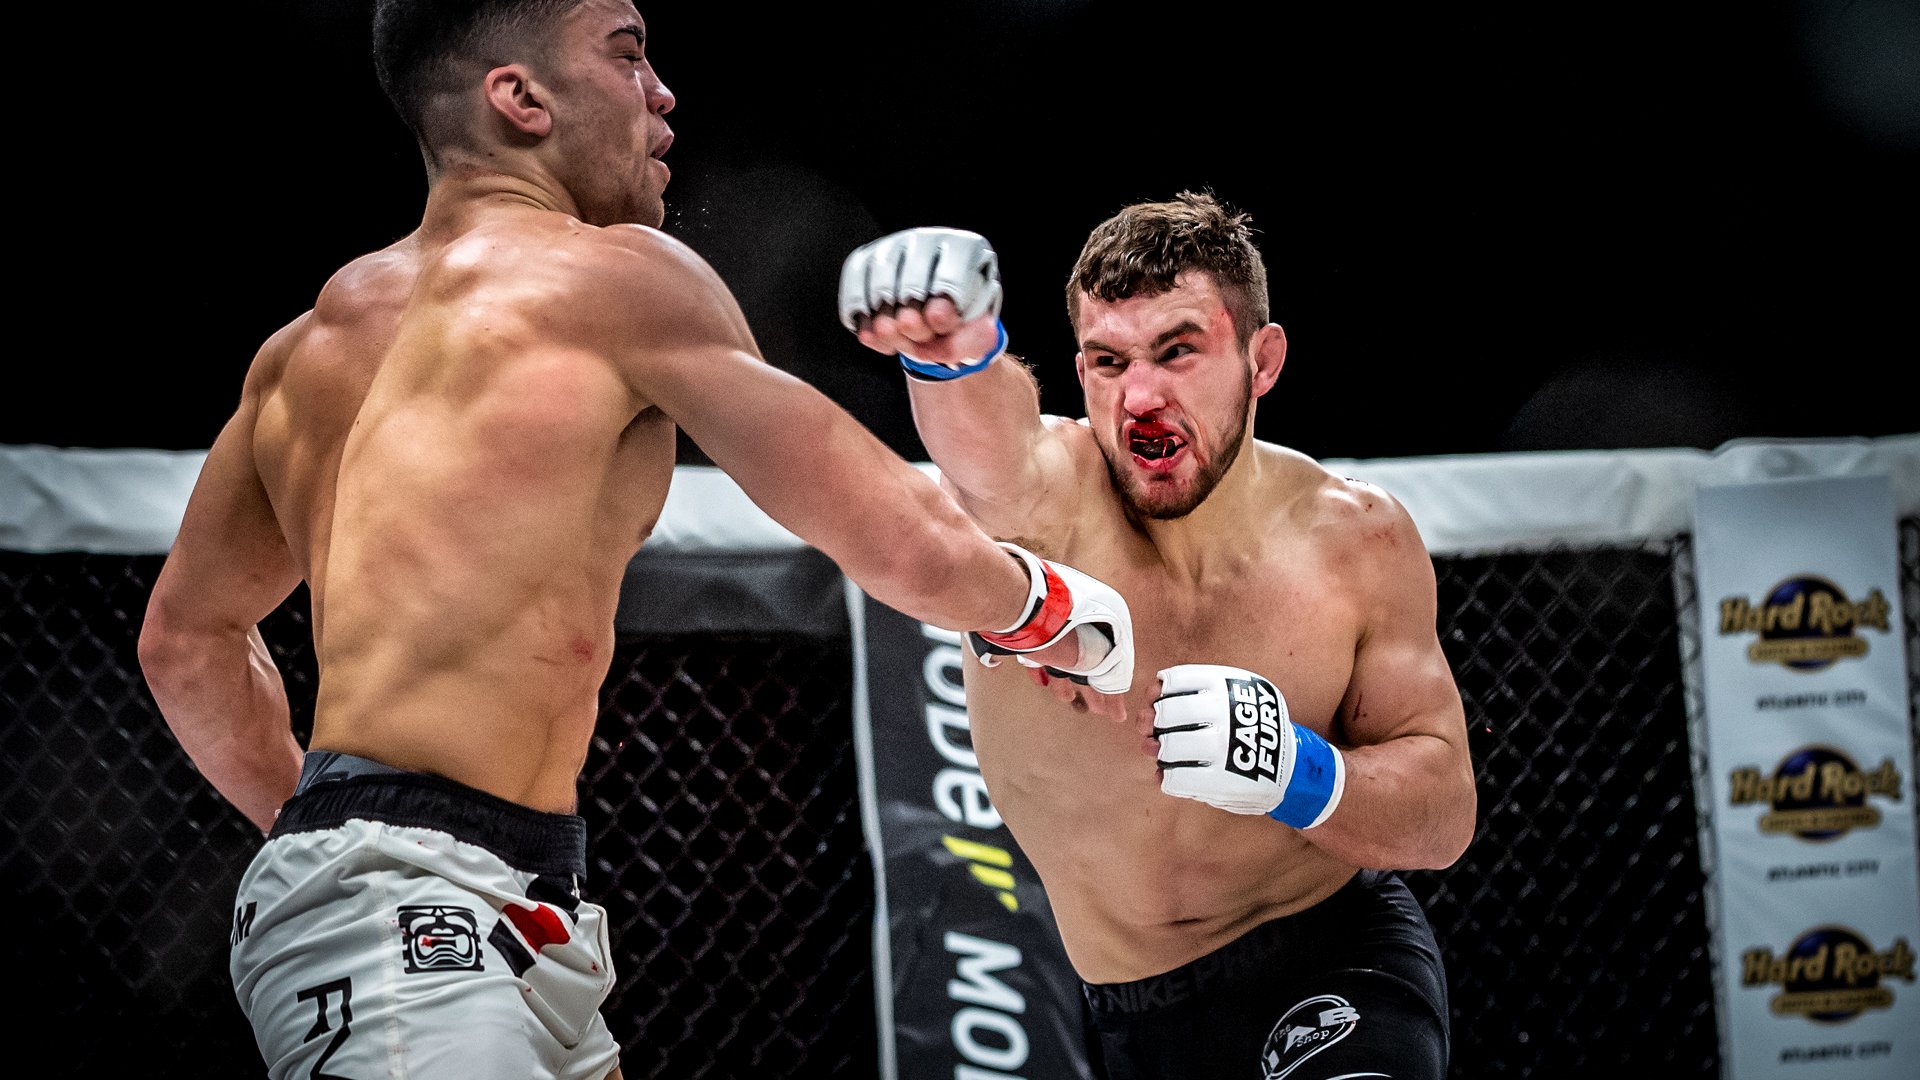 After three-year layoff, CFFC 116 headliner Tyler Mathison all in on MMA career — Cage Fury Fighting Championships